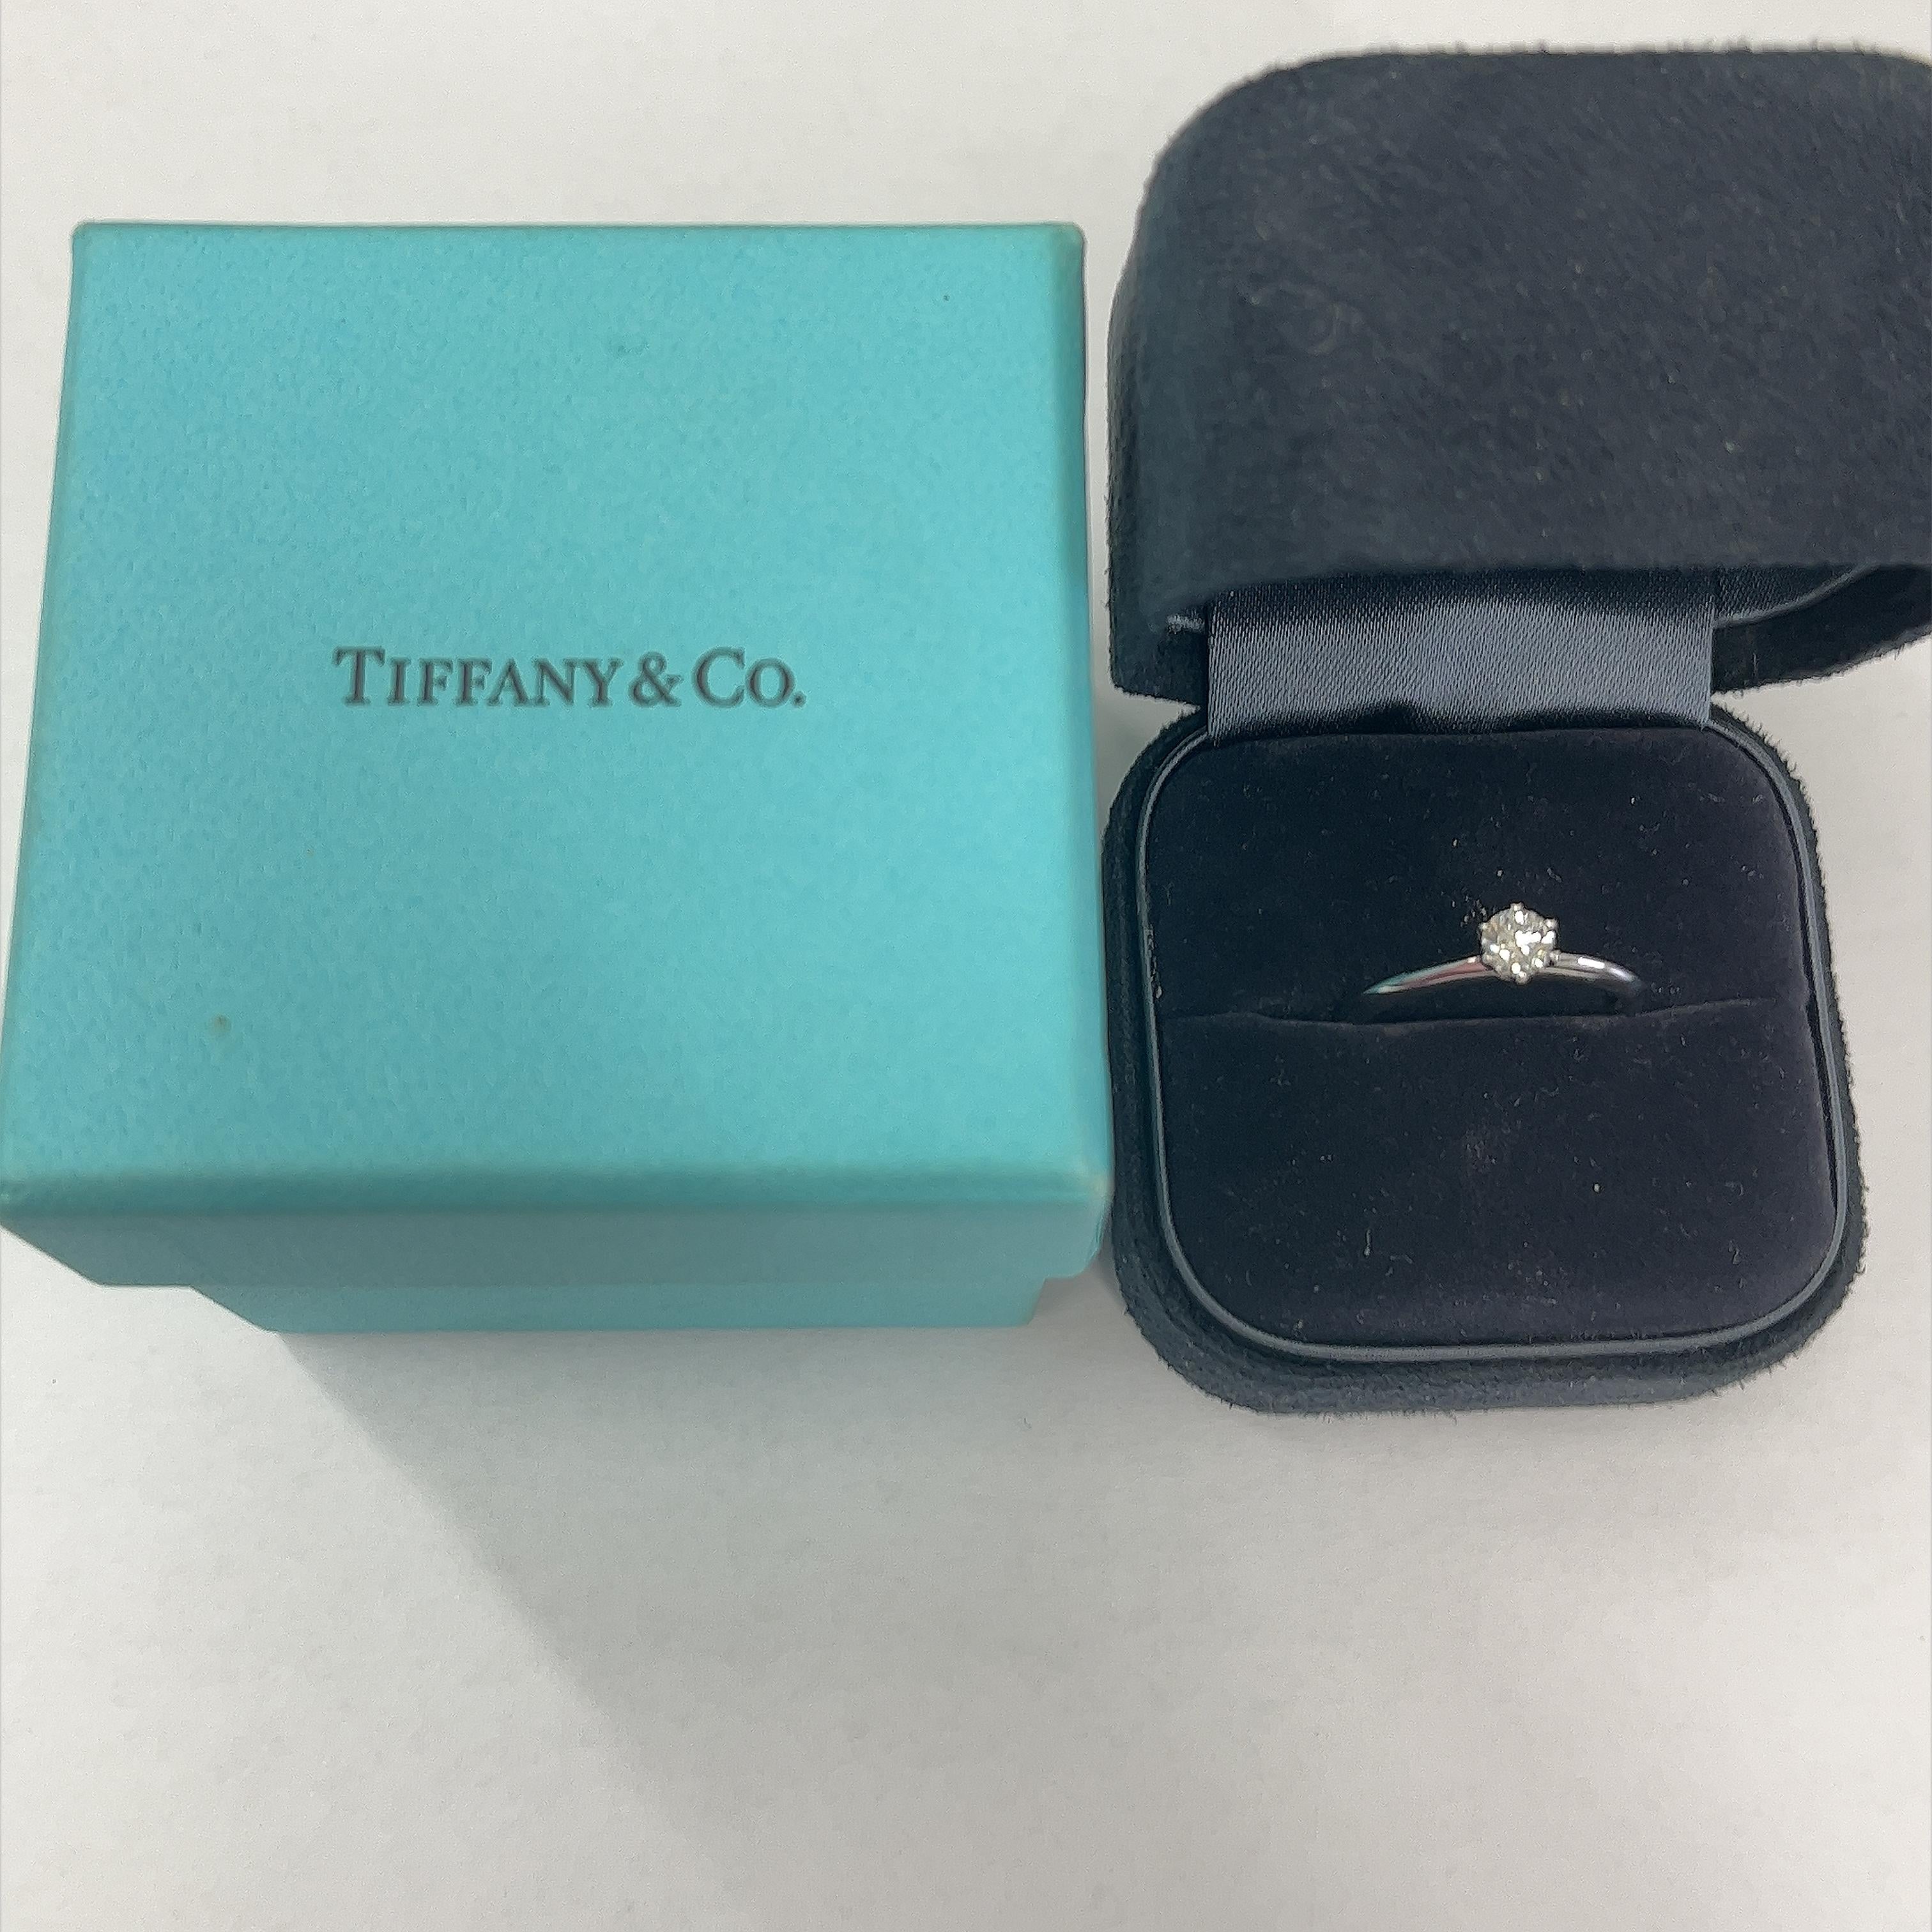 Embrace the epitome of elegance with the Tiffany & Co. Platinum Solitaire Diamond Ring. Adorned with a dazzling 0.31-carat H/VS1 Triple X diamond, this exquisite piece exudes timeless sophistication. Set in platinum, its classic design accentuates